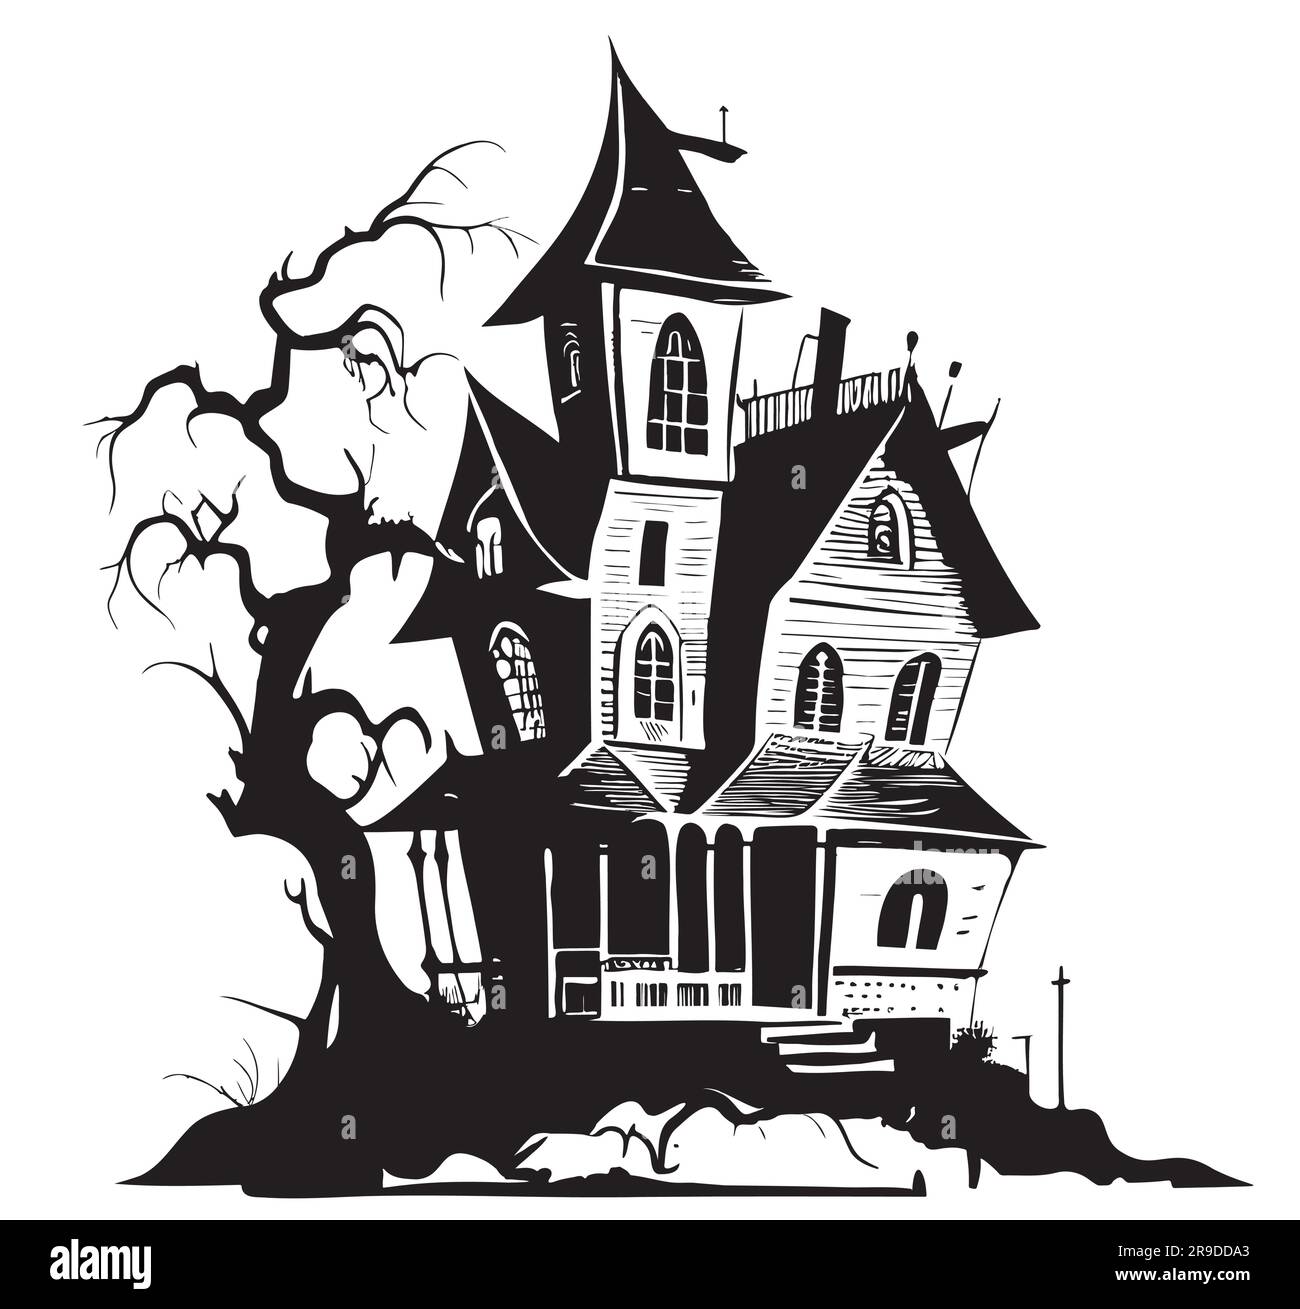 Haunted house sketch hand drawn in doodle style illustration Stock Vector